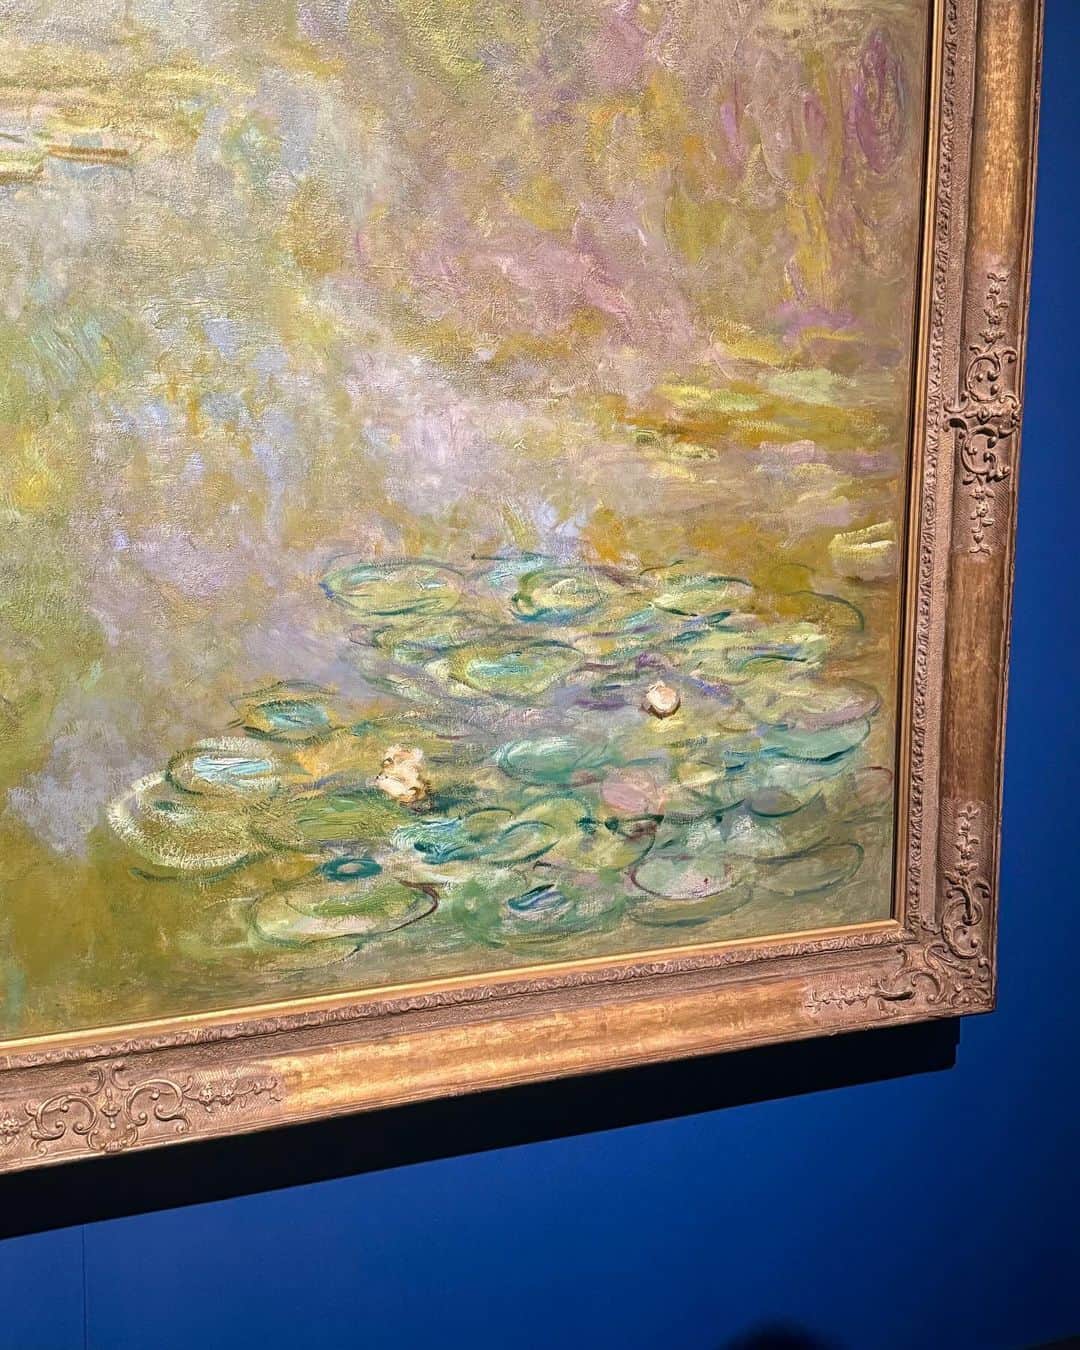 浅見姫香さんのインスタグラム写真 - (浅見姫香Instagram)「There is a work by Monet called “Le Bateau-Atelier”. It is said that he painted his works on the atelier boat while being swayed by the Seine River. There is a work called "Claude Monet Painting in his Studio" by Manet, a painter who was active at the same time as him. It depicts Monet painting on a boat, with his wife Camille next to him. After losing his wife, he began painting fewer people. He remarried Alice, the wife of his patron. In his later years, he developed cataracts and gradually lost his eyesight, but he still left behind paintings that exude a sense of dynamism. He was influenced by Japonism, collected ukiyo-e prints, and painted his wife (Camille) wearing a kimono. In Japanese Buddhist thought, the “lotus” in water lilies has the meaning of sharing a shared destiny, regardless of whether things are good or bad. I wonder how he felt when he painted water lilies after his wife's death. I felt like I could feel a little bit of his sadness behind the bright colors.  モネの「モネのアトリエ船」と言う作品がある。 彼は、セーヌ川に揺られながらそのアトリエ船の上で作品を描いていたそう。彼と同時期に活躍した画家のマネが「アトリエ舟で描くクロード・モネ」と言う作品を残しているが、そこには船の上で絵を描くモネと、彼の横には妻であるカミーユが描かれている。 彼は、妻を亡くしてからあまり人を描かなくなった。そして、彼のパトロンの妻であったアリスと再婚。晩年は白内障になり、だんだんと視力を失いながらも躍動感が漂う絵を残していた。彼は、ジャポニズムに影響を受け、浮世絵を収集し、着物を着せた妻(カミーユ)の絵も残していた。 日本の仏教思想で、睡蓮の「蓮」には、一蓮托生(事の善悪にかかわらず運命を共にする関係)と言う意味があるそう。彼は妻の死後、睡蓮をどんな気持ちで描いていたのだろうか。 鮮やかな色彩の奥に、彼の切なさが少し見え隠れした。」10月28日 15時28分 - himeka_asami_official